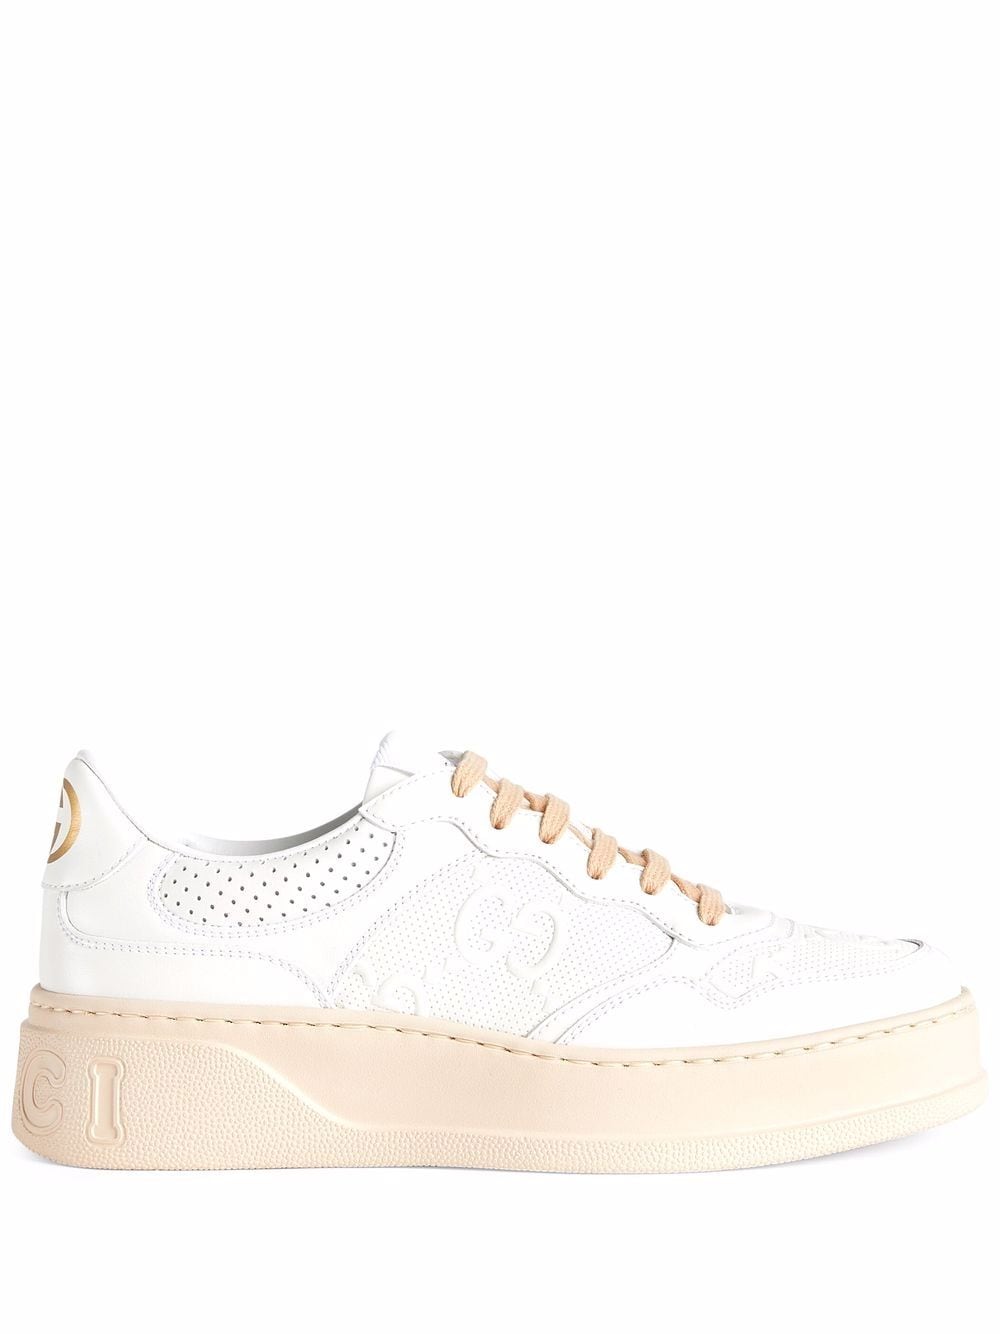 Gucci GG Embossed low-top Sneakers - Farfetch